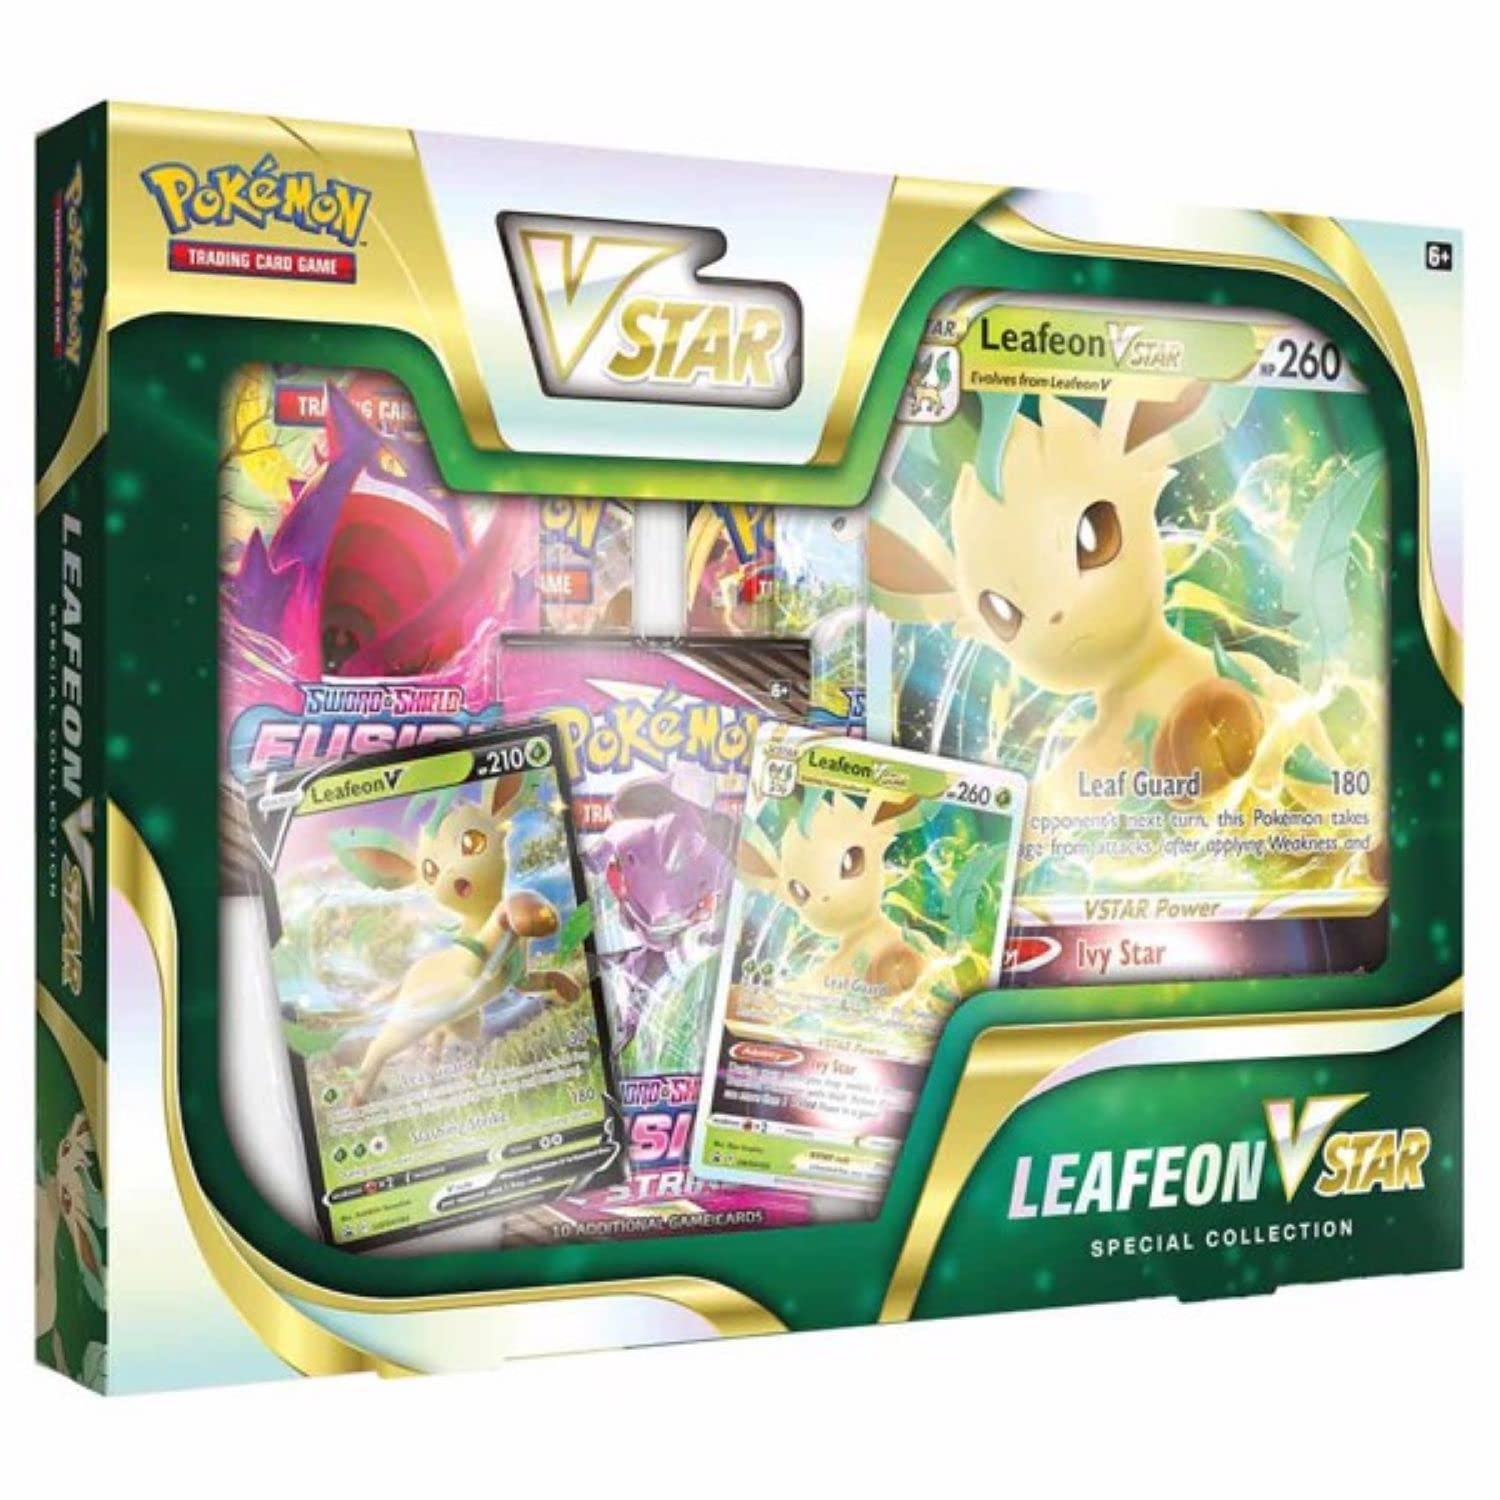 Leafeon Vstar Special Collection